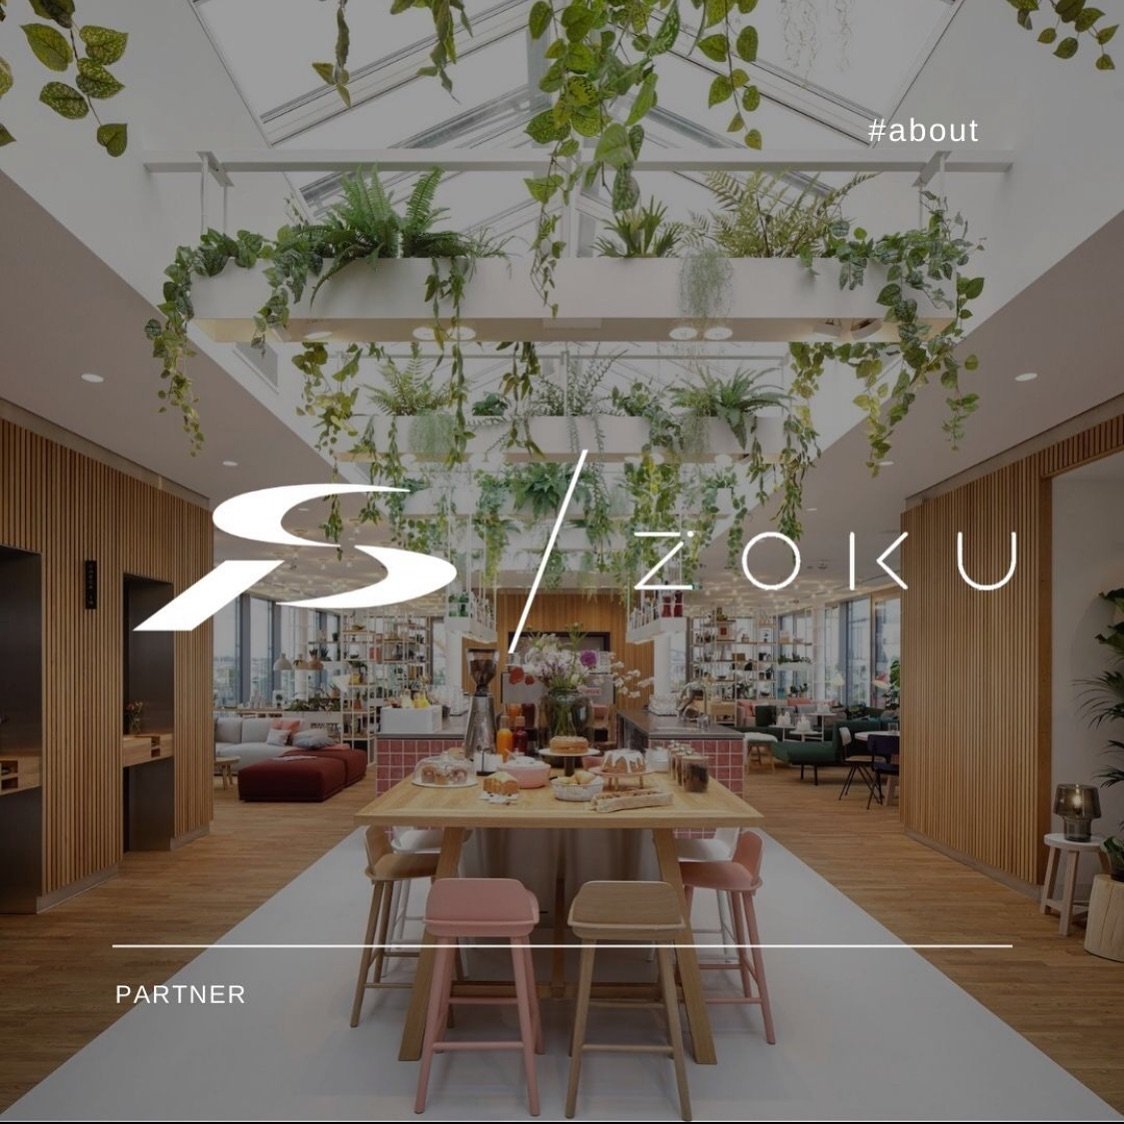 Our team has been putting their heads together at @zokuvienna for several months now and we would like to take a moment to thank our host for the great working atmosphere 🤝 

The friendly service provided is always appreciated and we consistently re